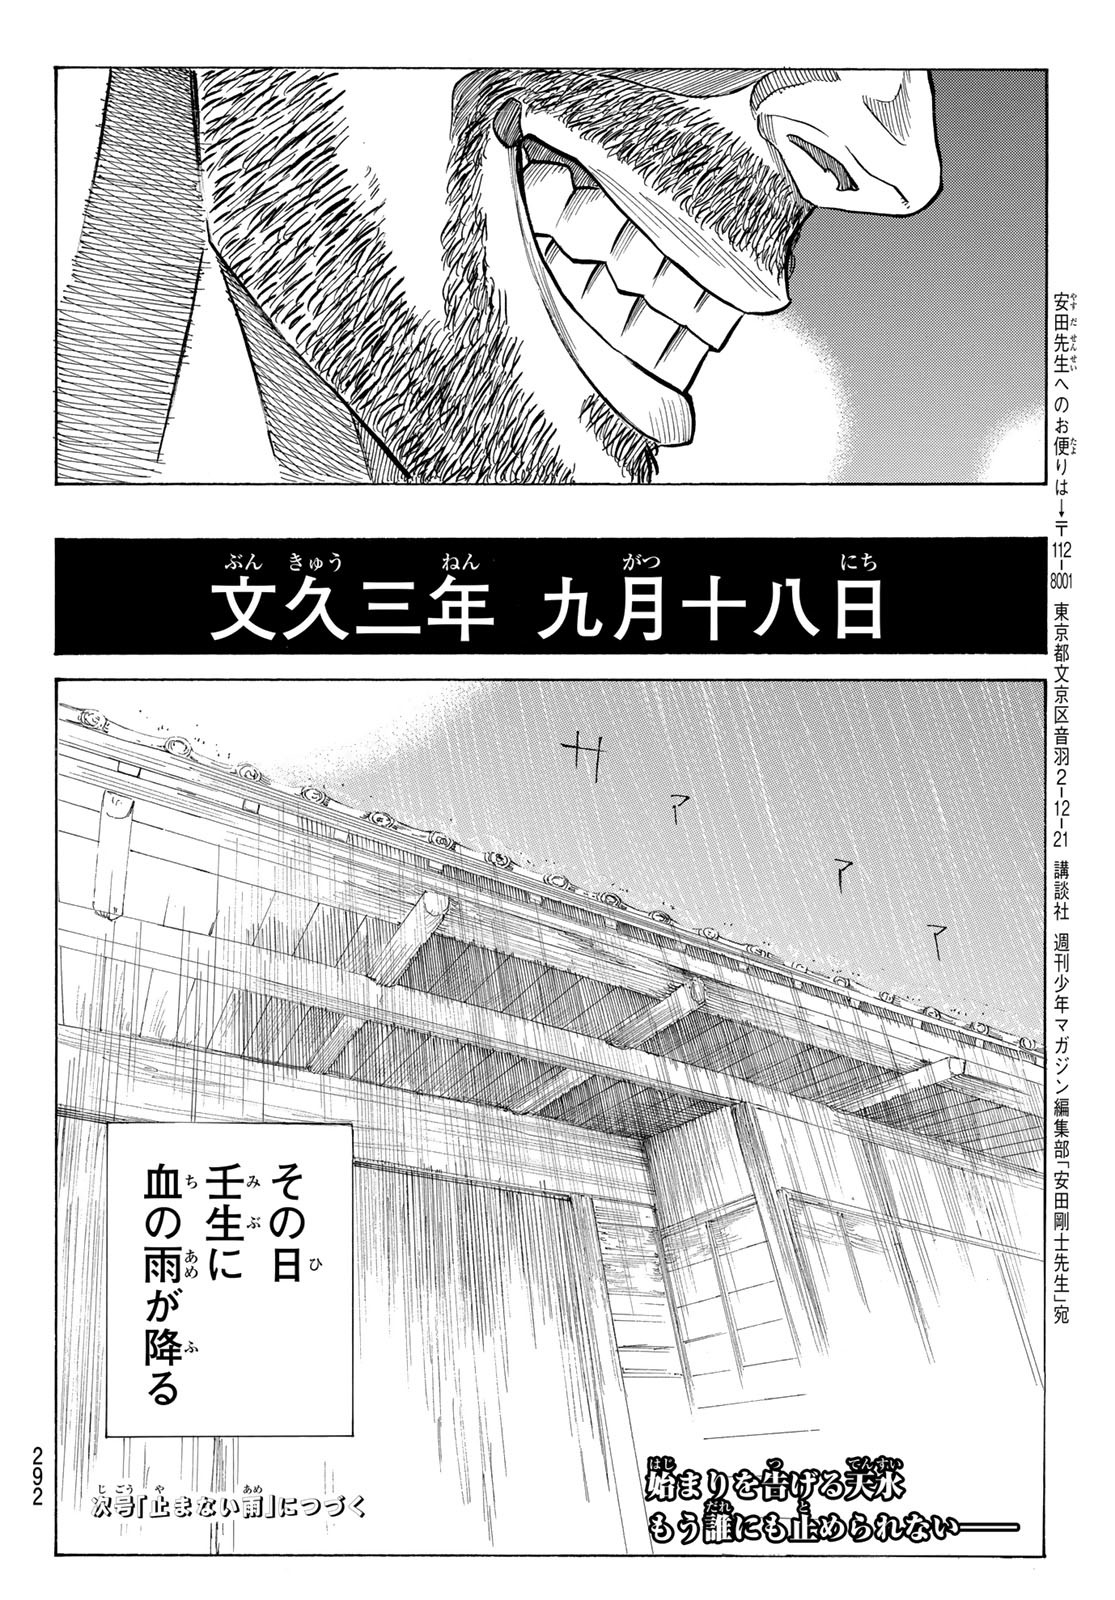 An Mo Miburo 第97話 - Page 20